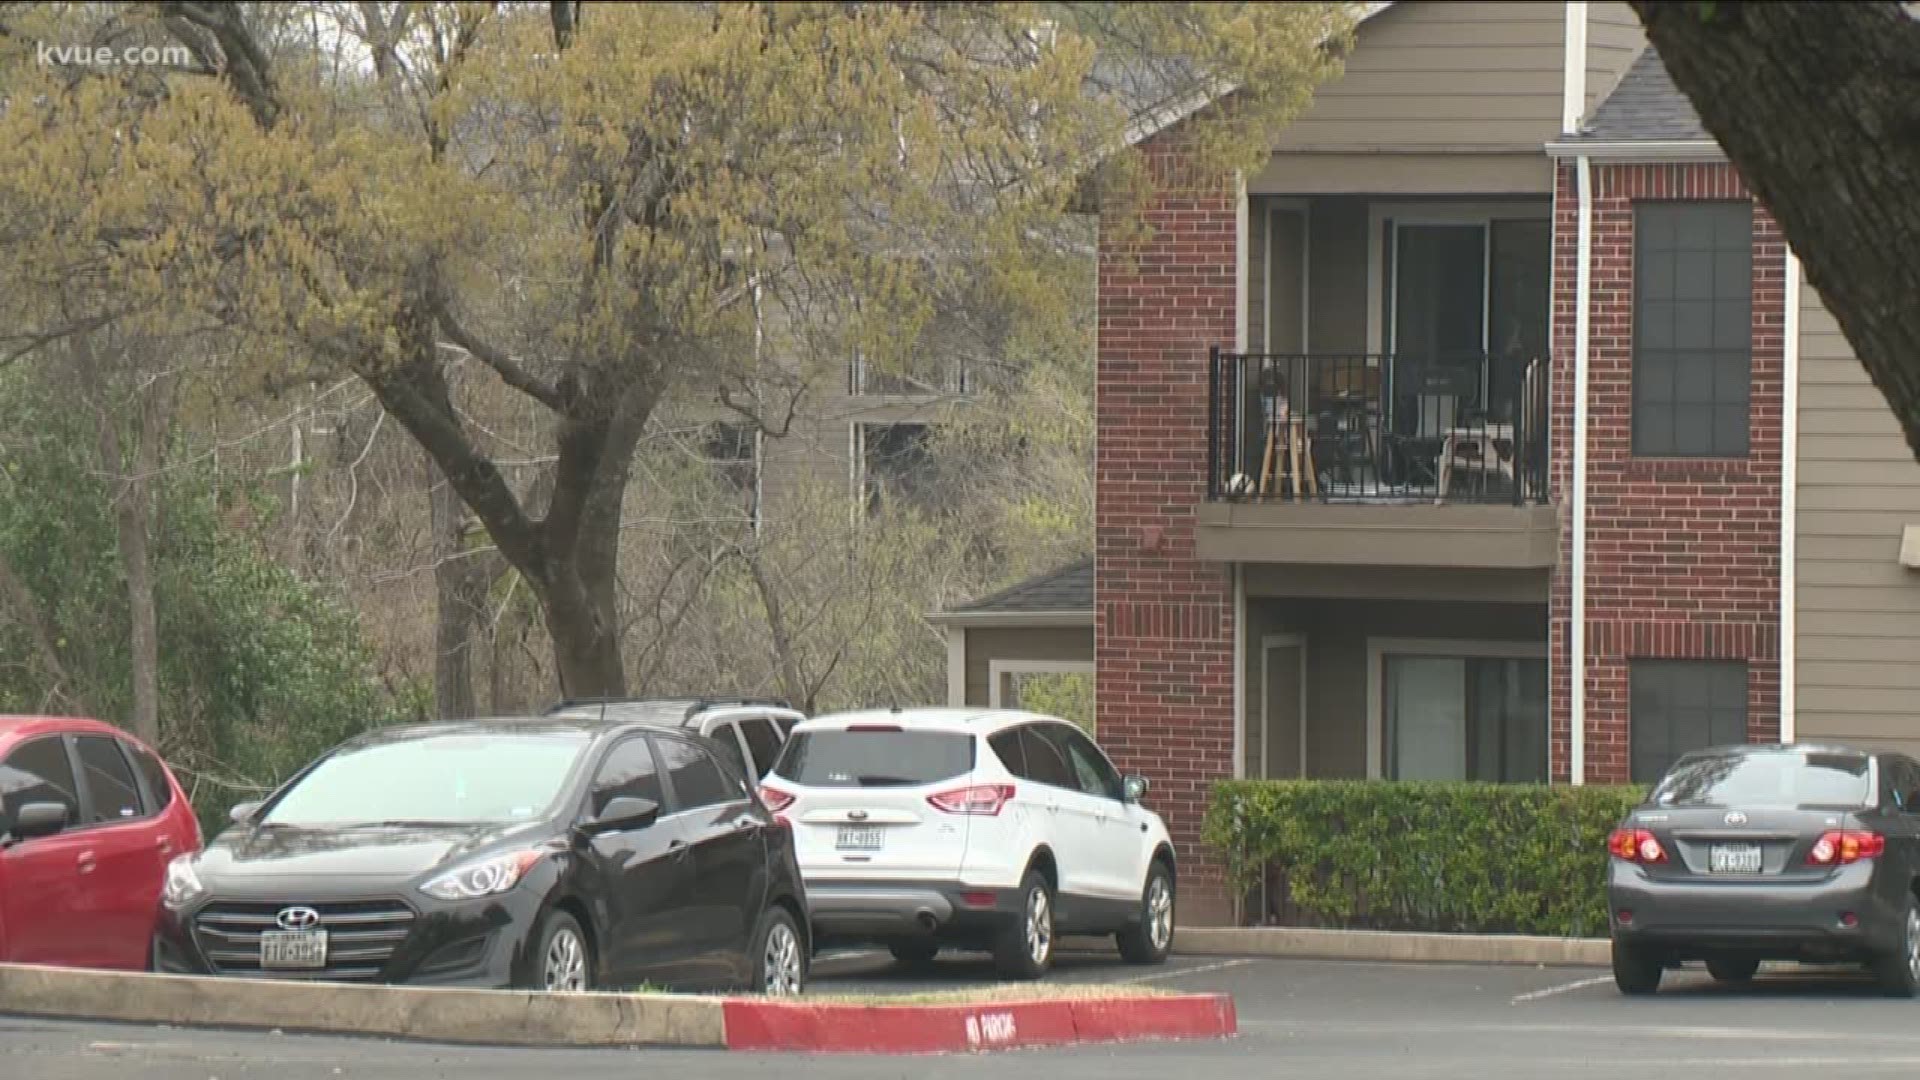 The search for a rapist continues after a woman was attacked in her northwest Austin apartment this week.